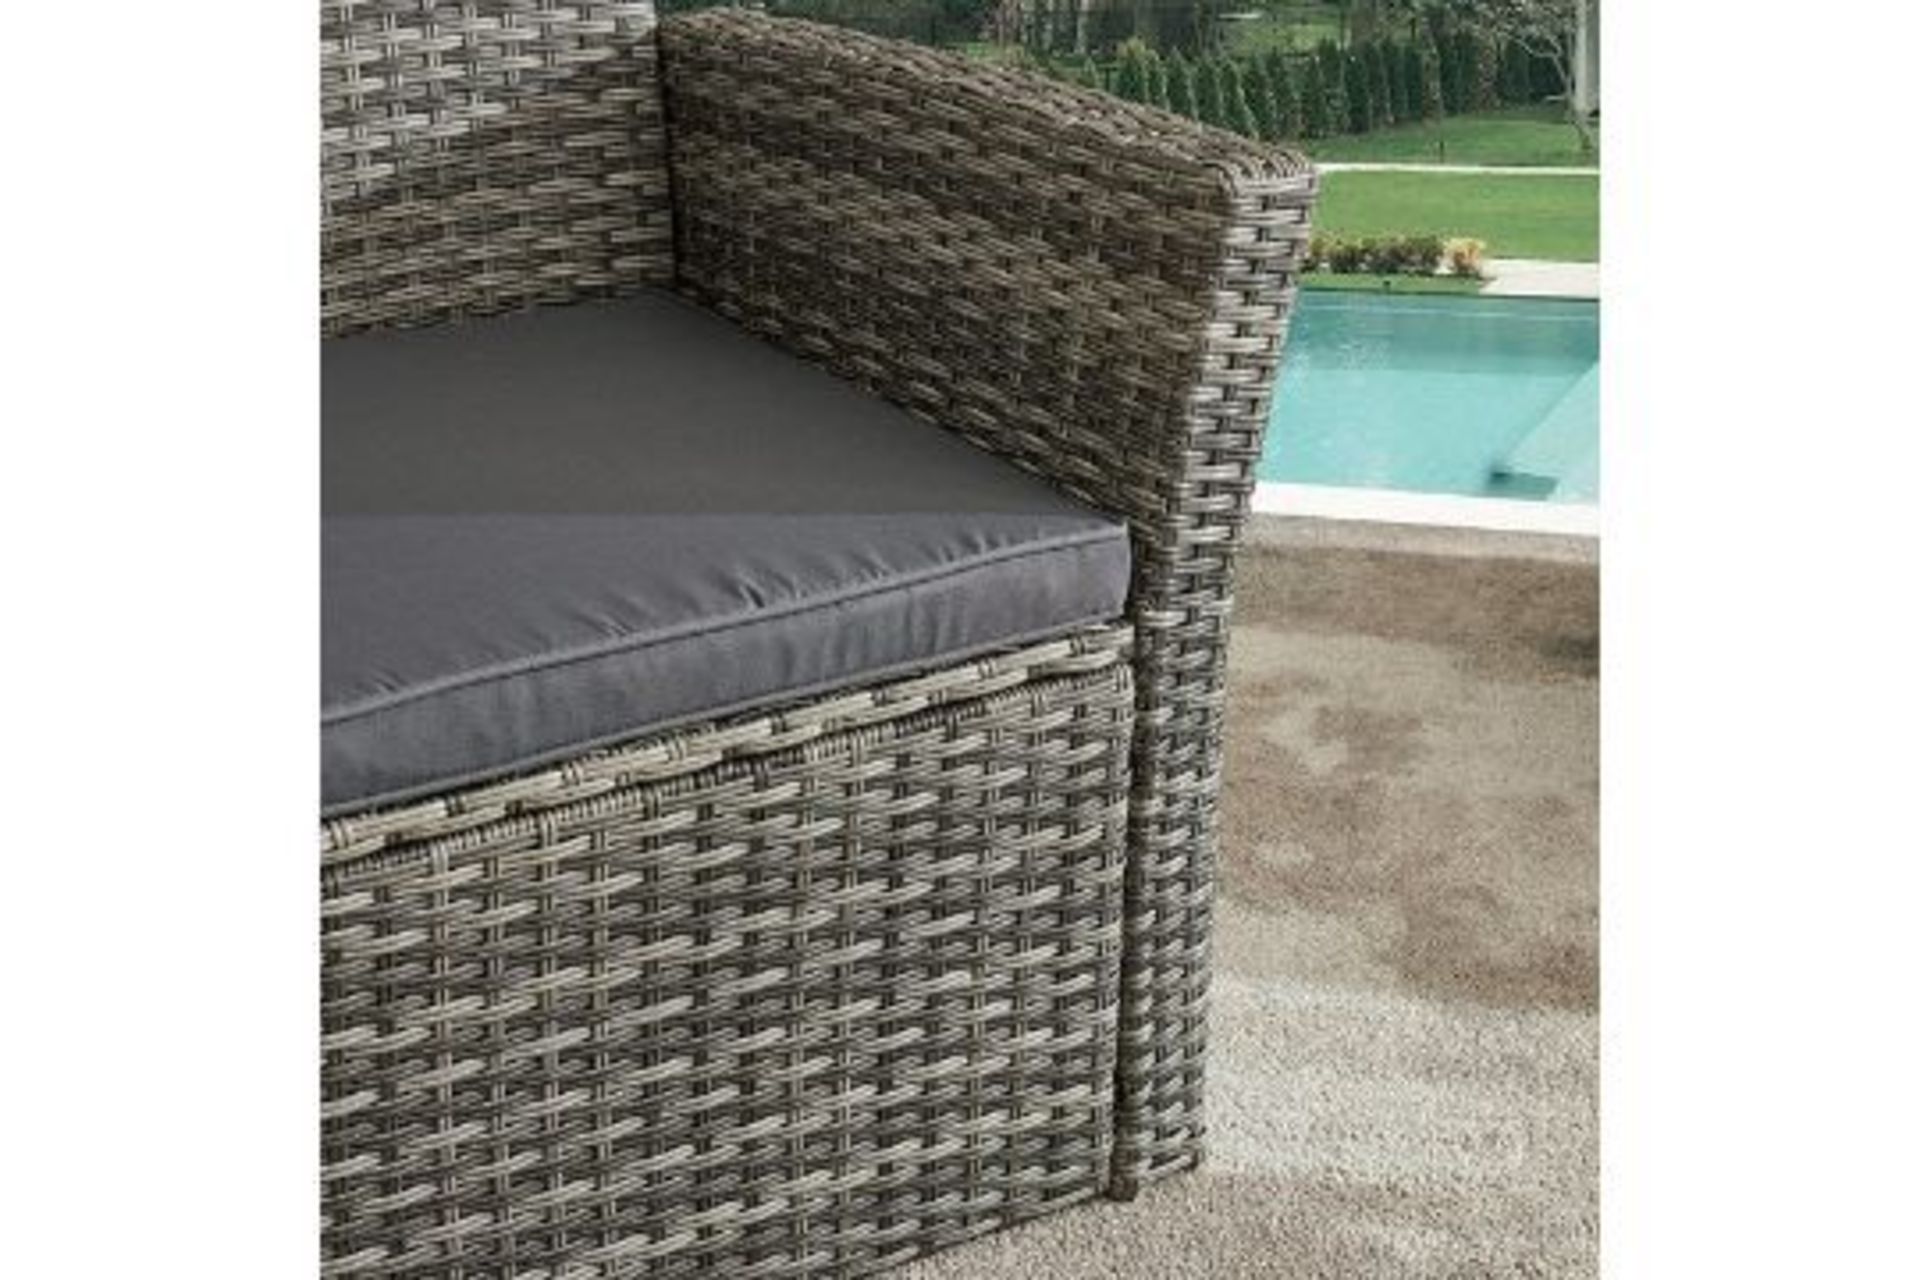 New Boxed Corfo 4 Seater Garden Furniture Set in Grey. The 4-piece garden furniture set includes a - Image 3 of 6